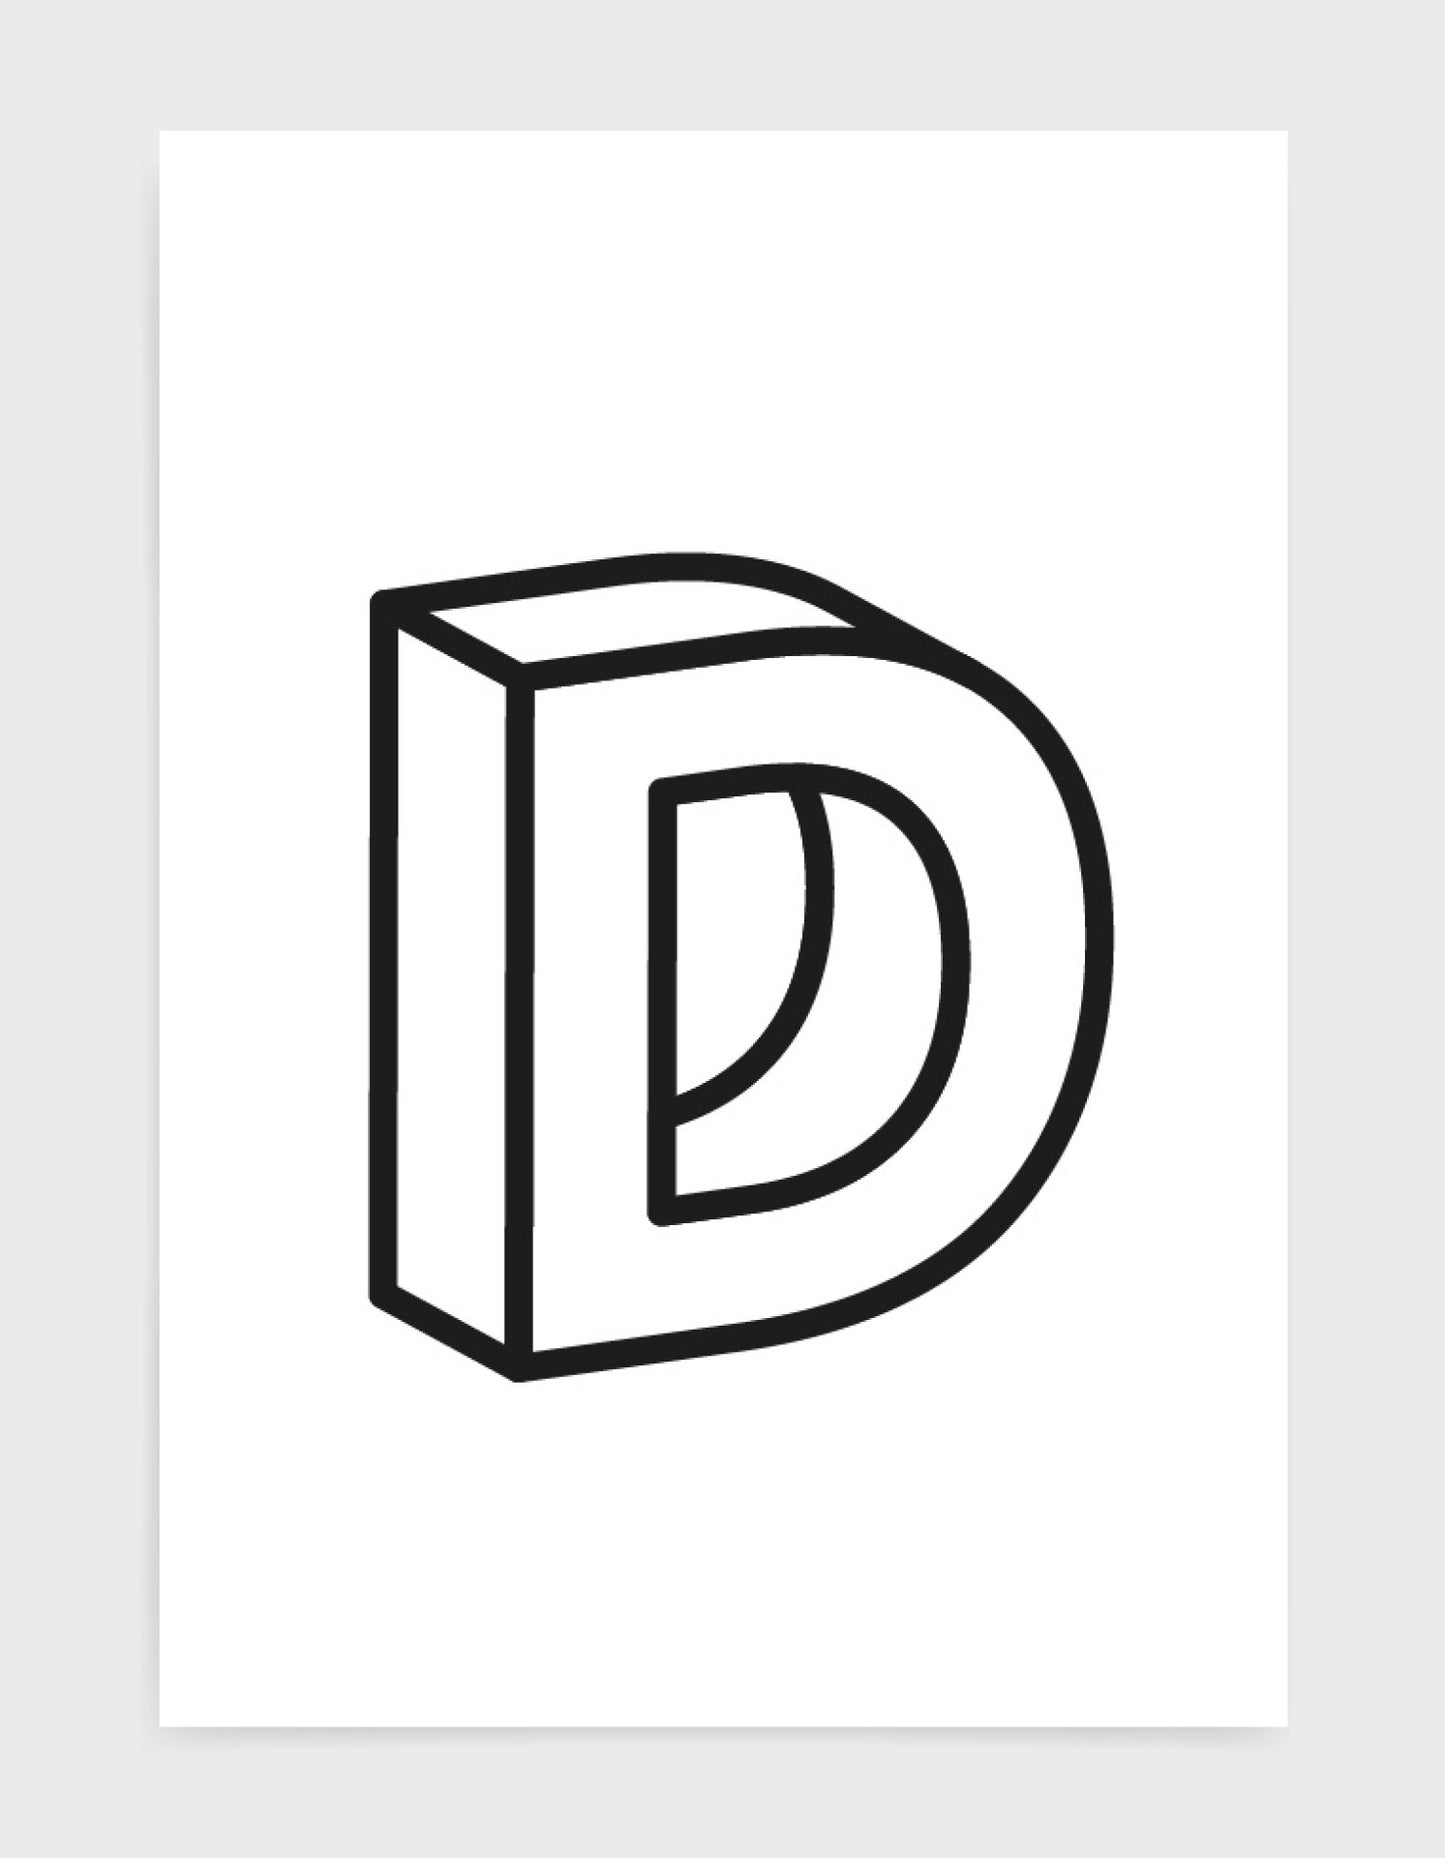 monochrome typography alphabet print depicting the letter D in 3D black type